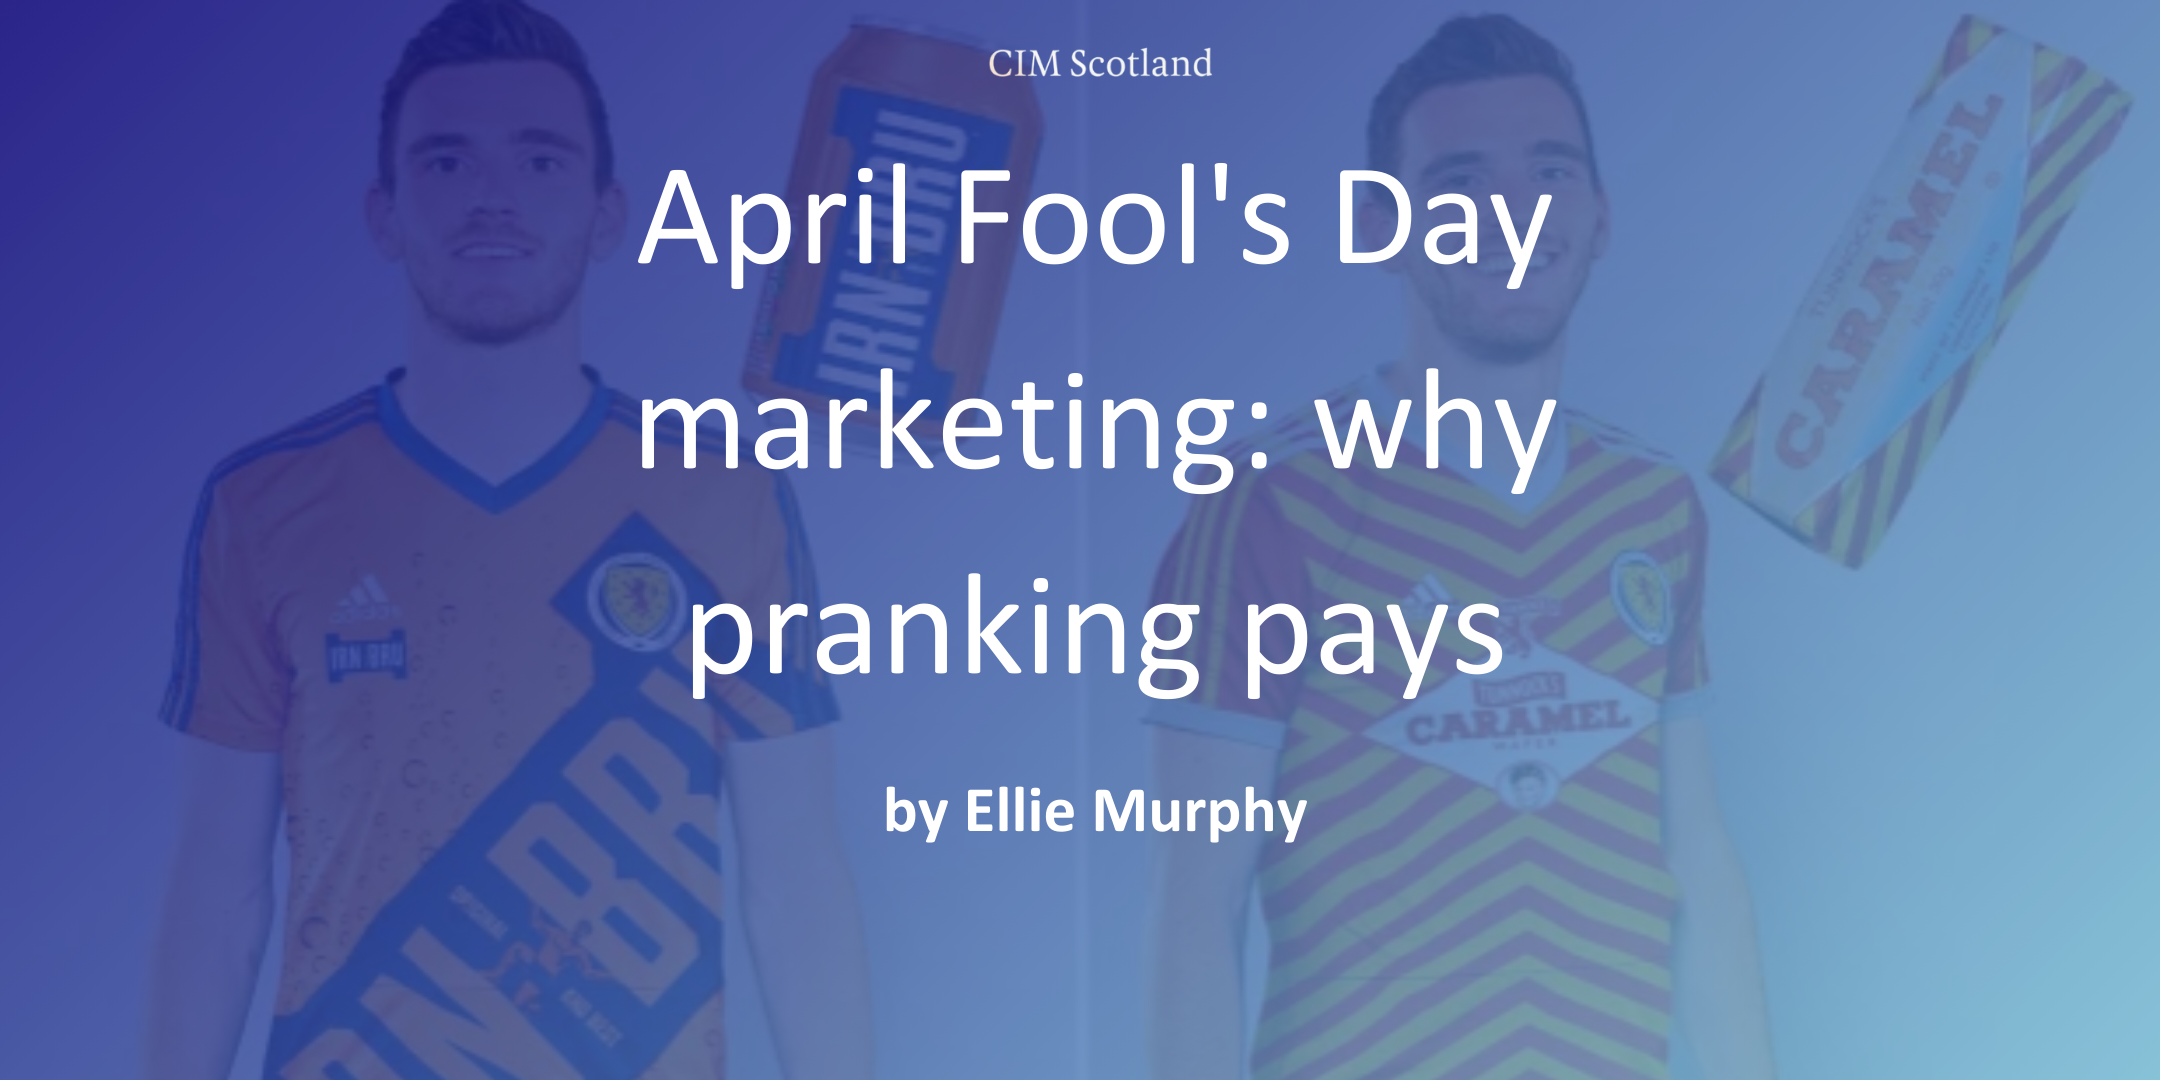 April Fool's Day marketing: why pranking pays